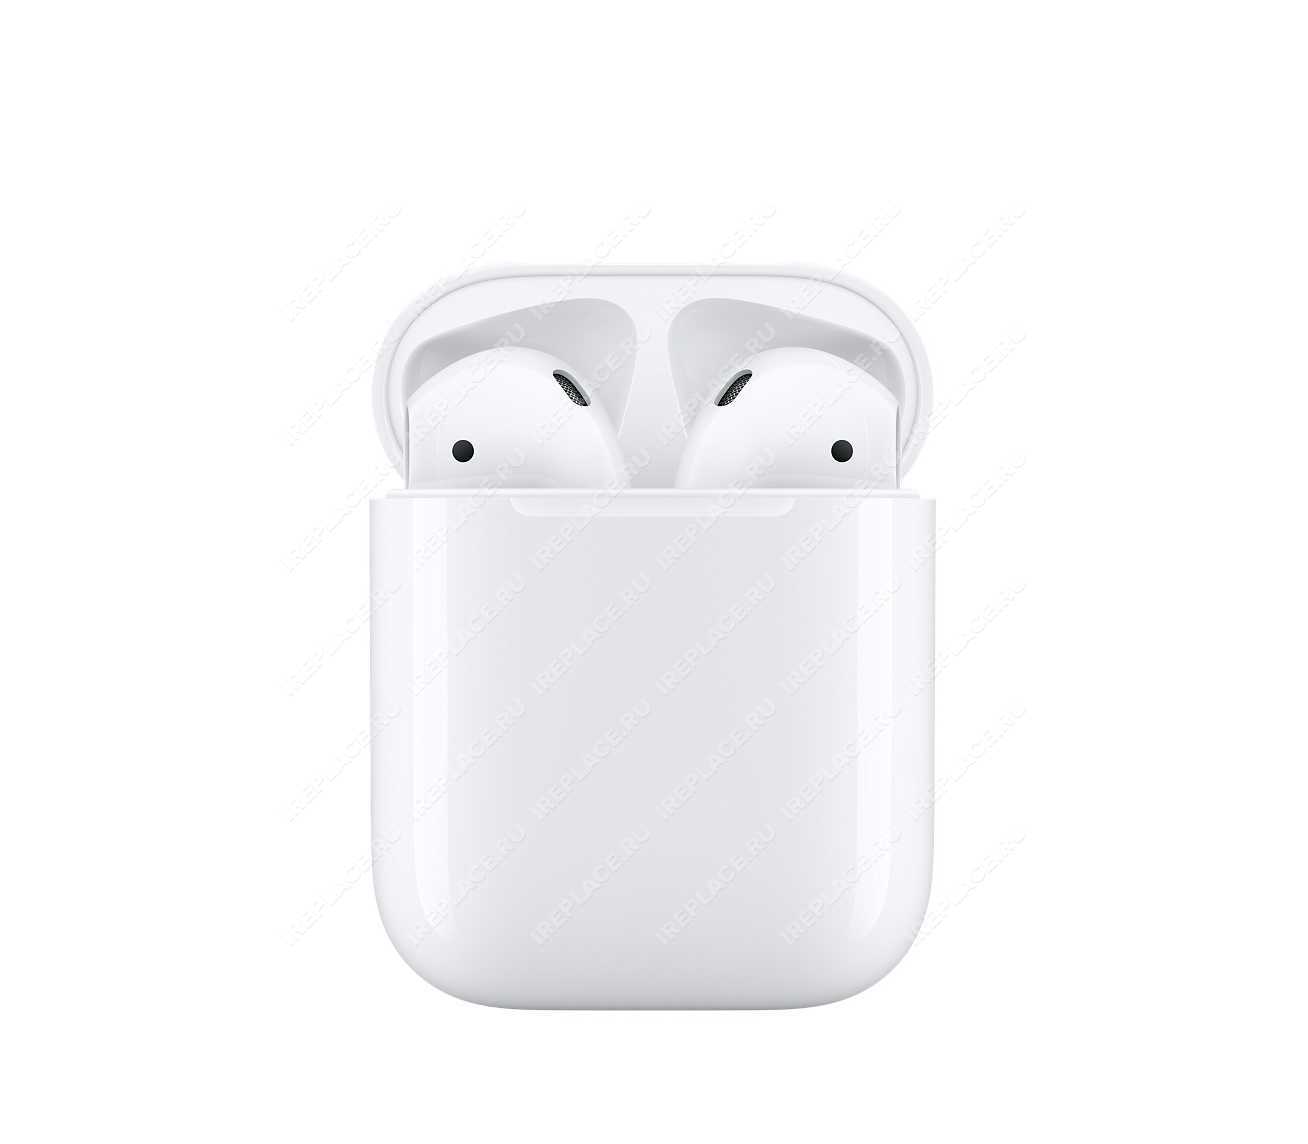  -   Apple AirPods 12   A1602    4 49000         iReplace     8-800-555-83-35